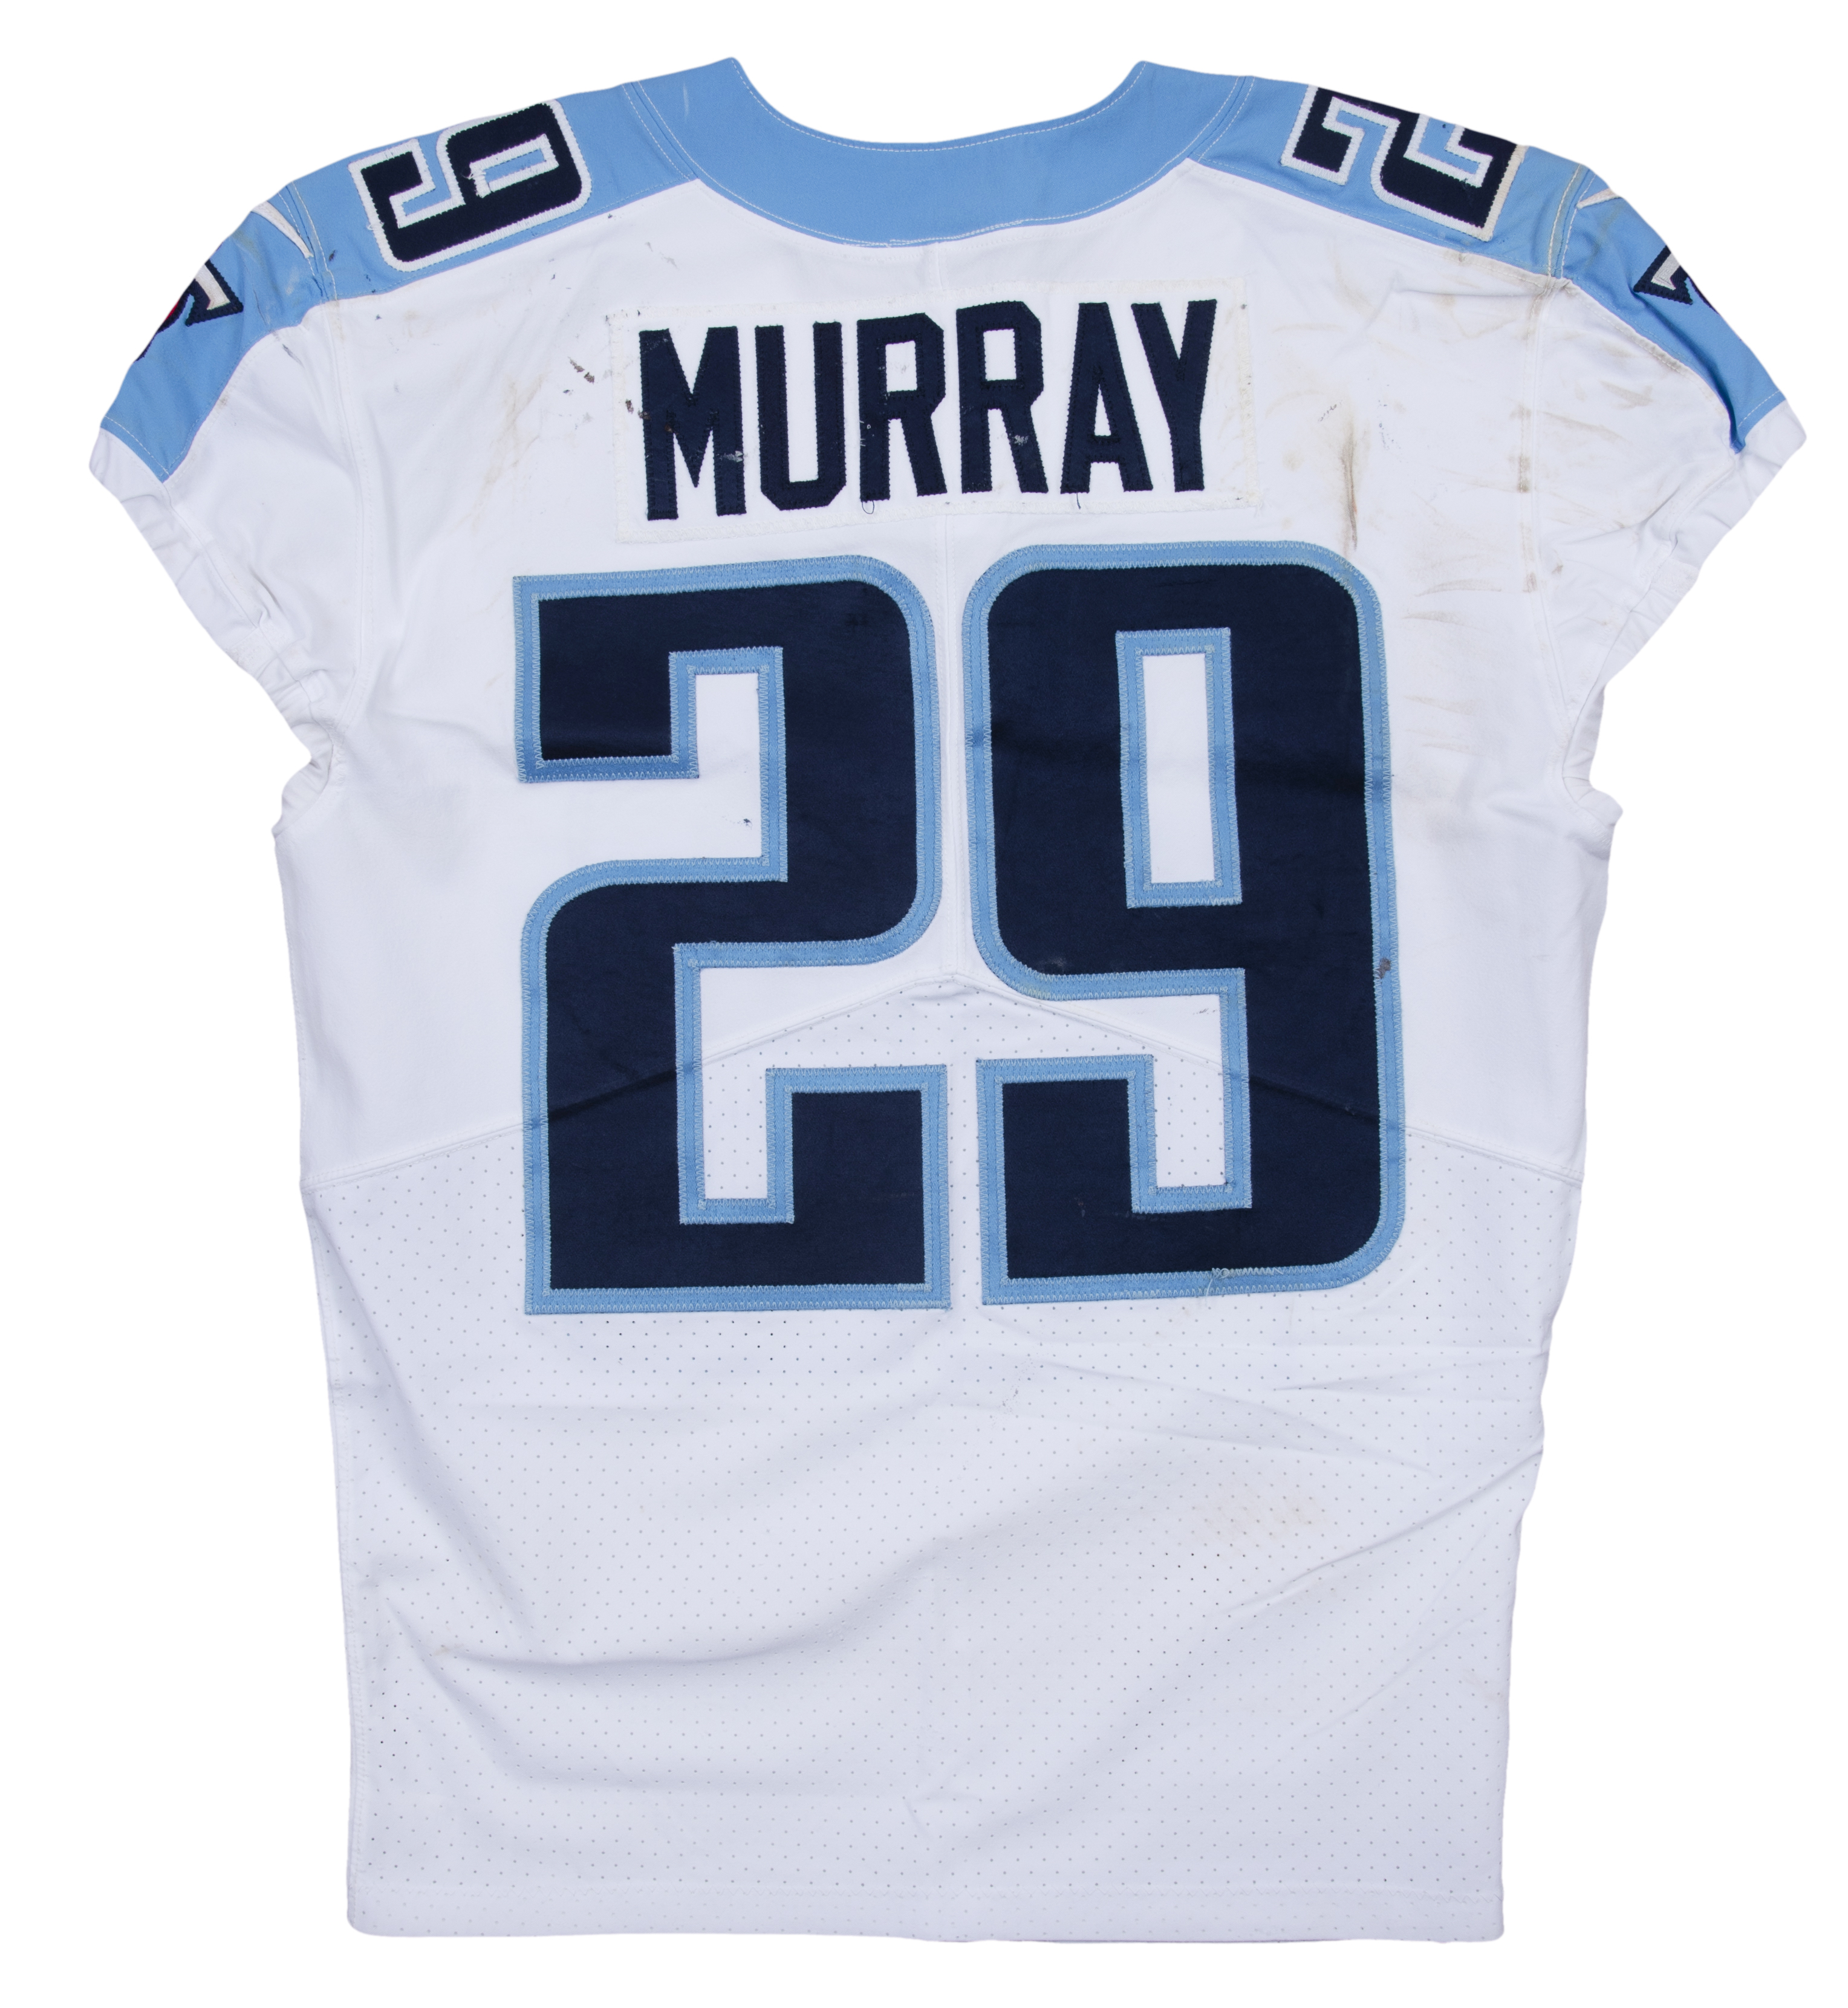 demarco murray jersey number titans